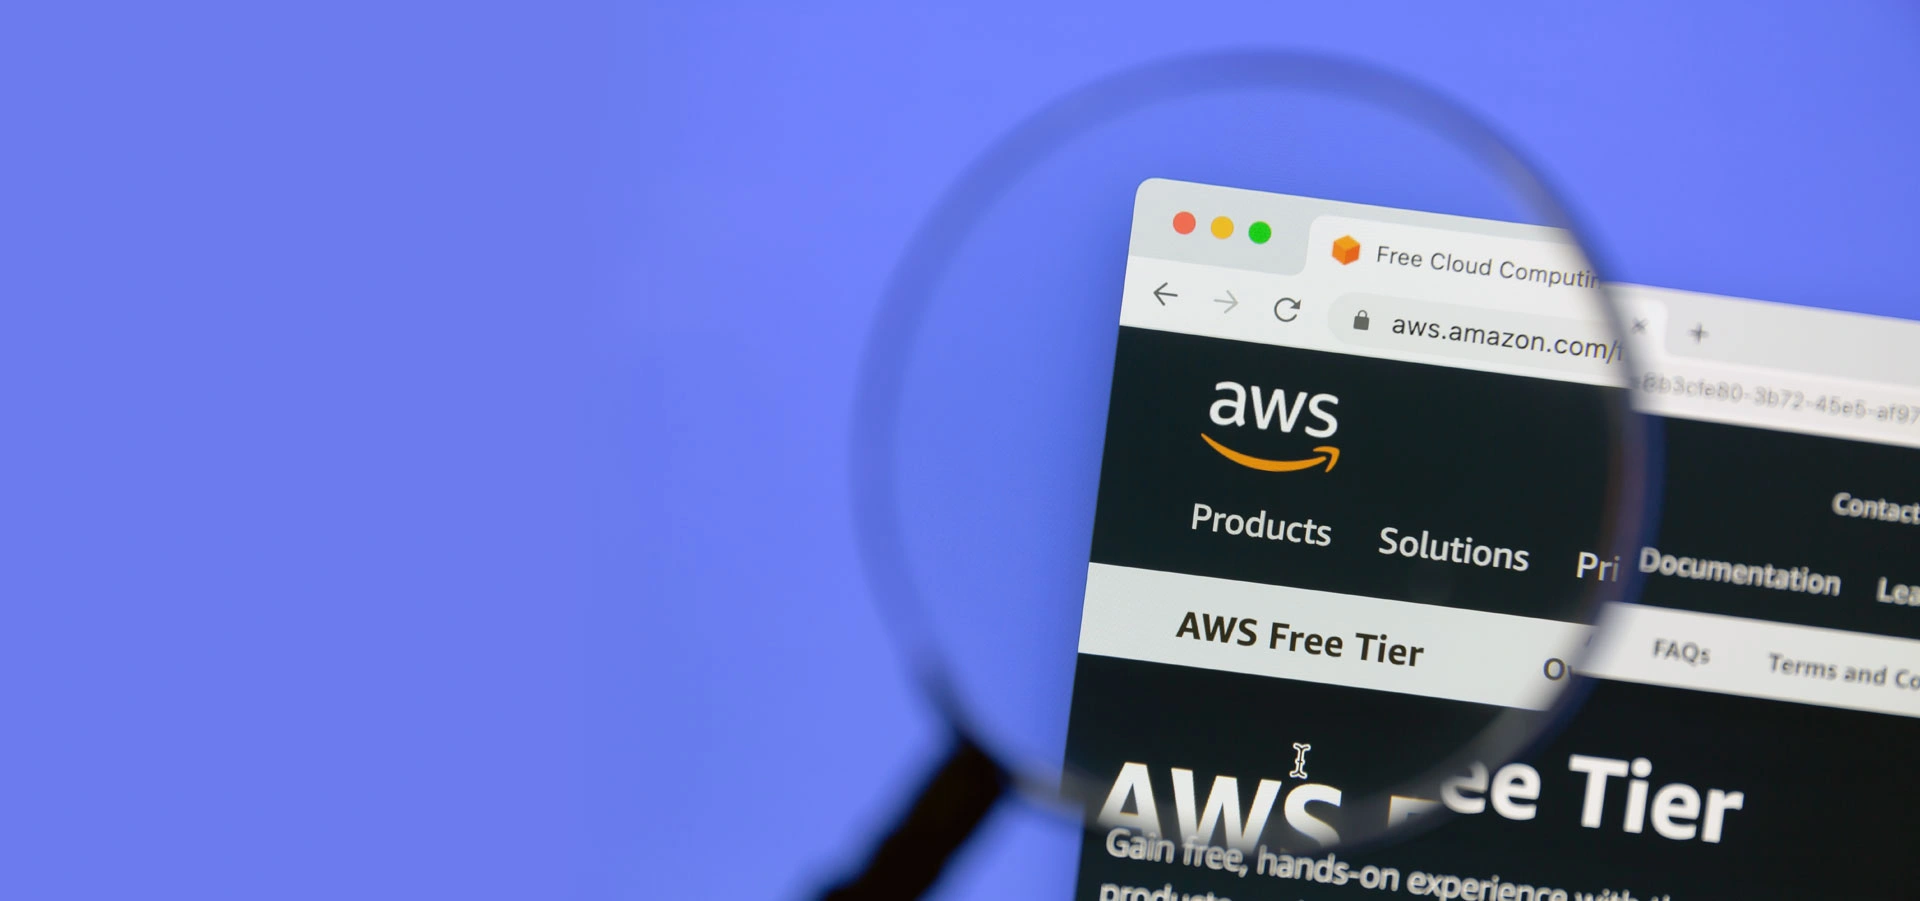 Why is hosting in AWS just better?